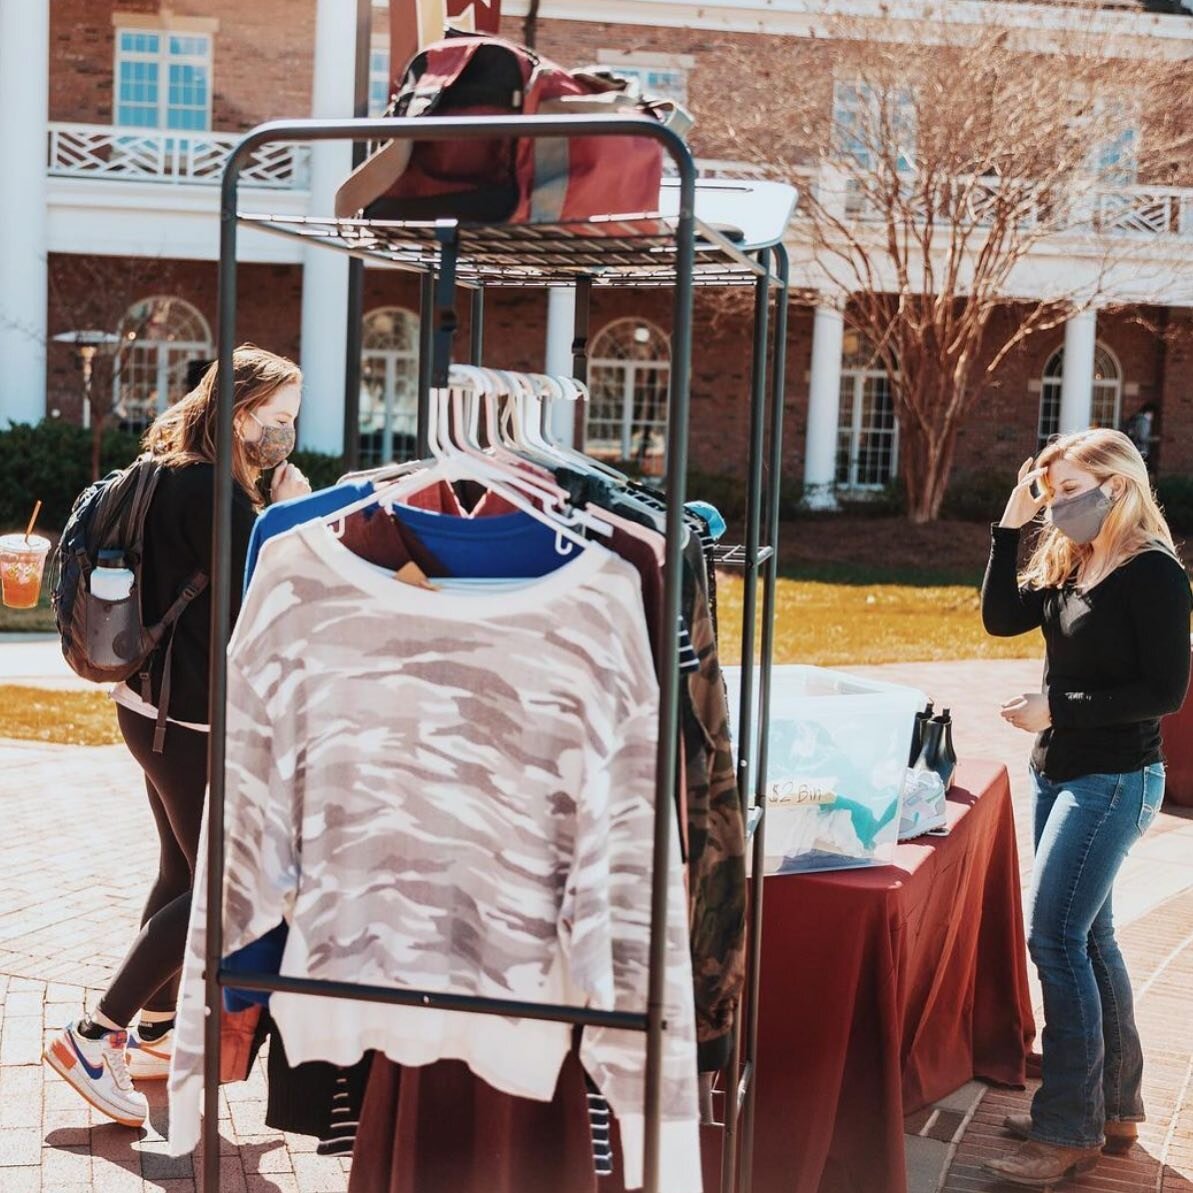 🎉Student(s) Business Highlight🎉 

@grace.g_____ &amp; @jakobmatthewreuter created @elonuthrift ! 

Elon U Thrift takes items you no longer want or need, clean/fixes them if needed, takes photos of them, posts them on their Instagram, and if they se